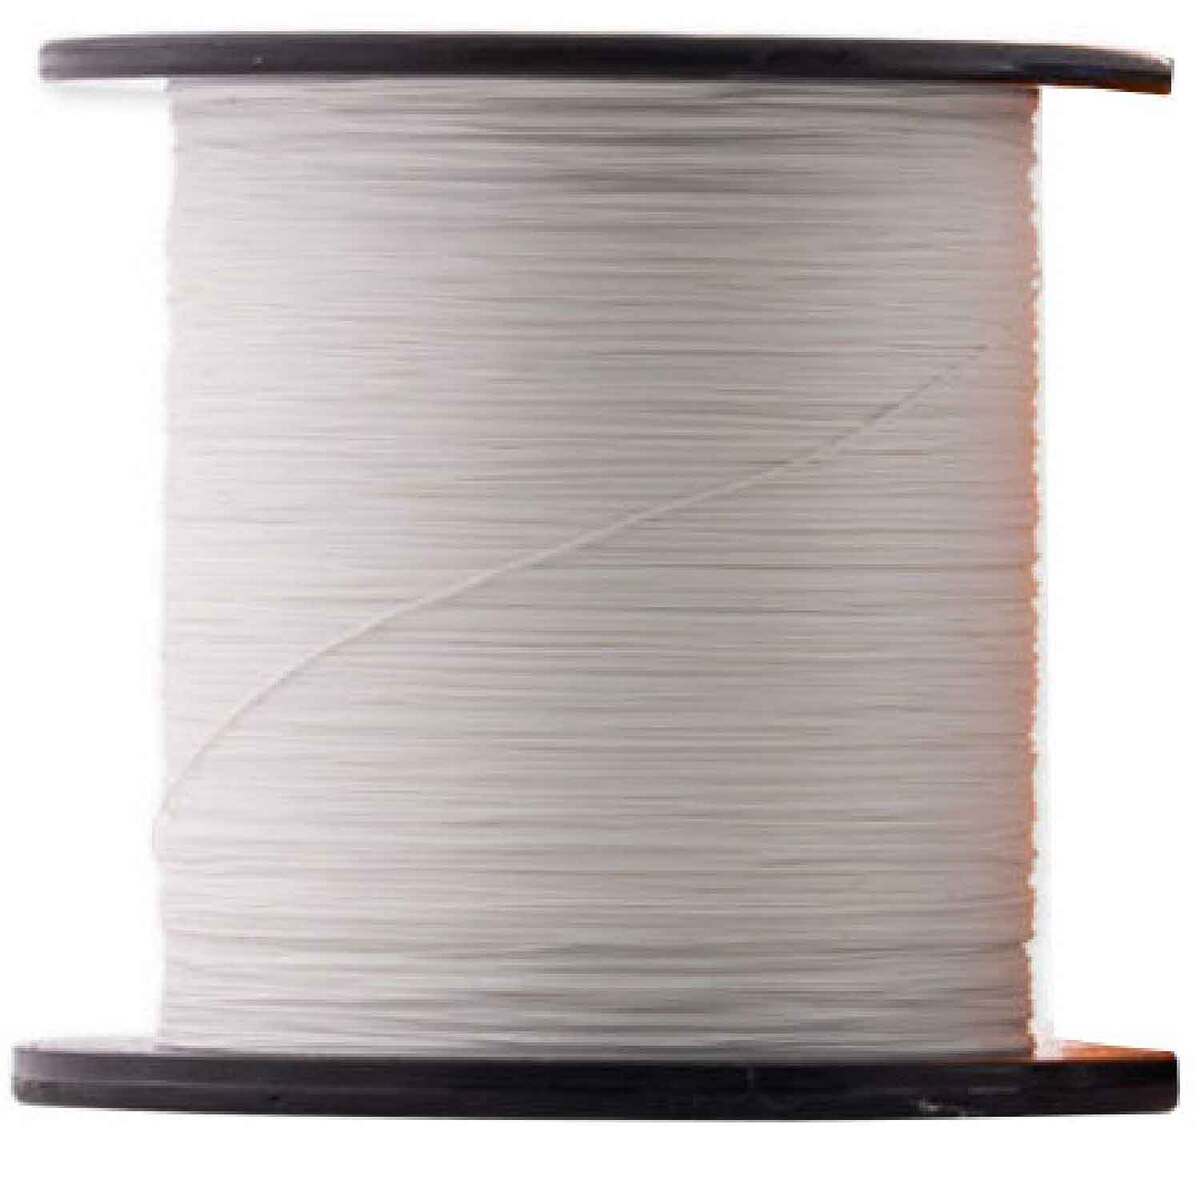 hollow braided fishing line, hollow braided fishing line Suppliers